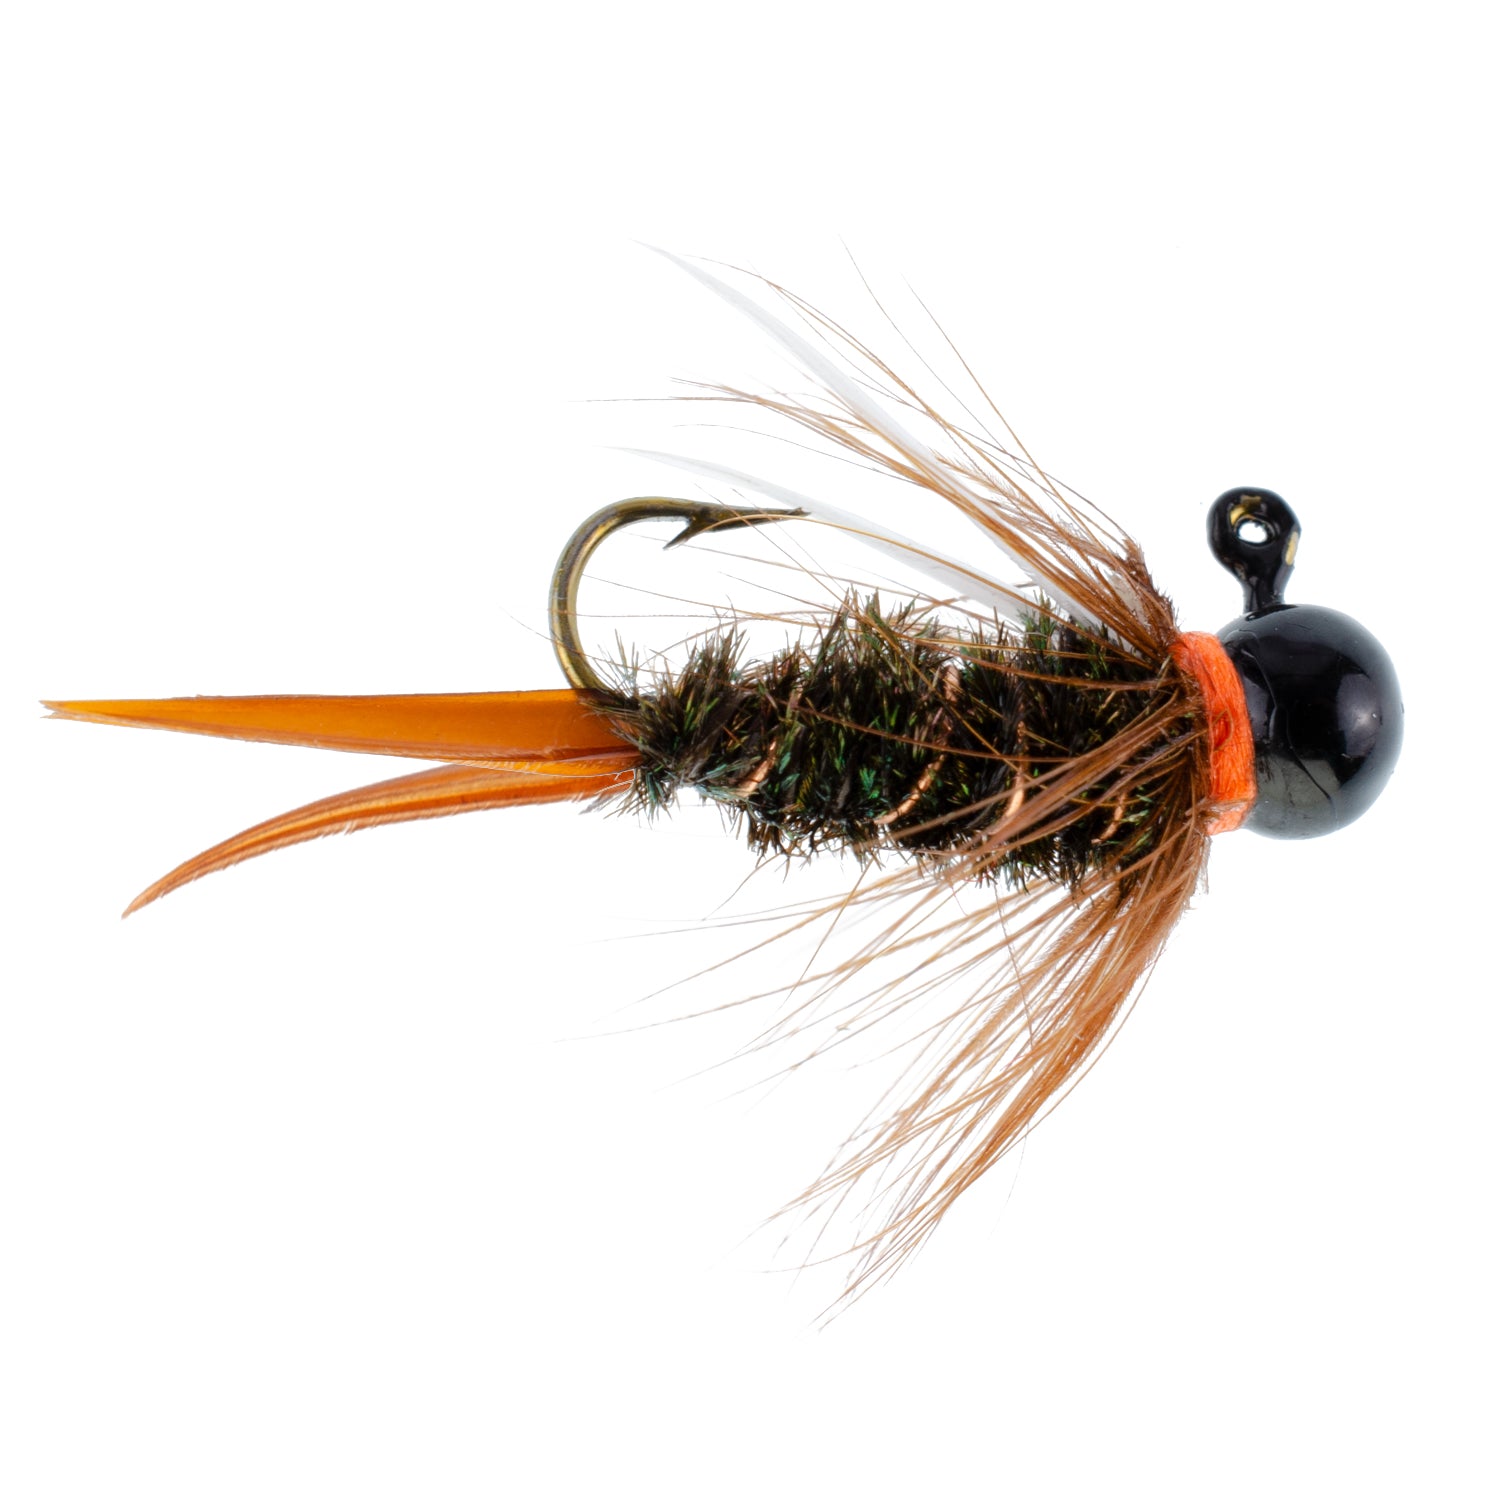 The Fly Fishing Place Tungsten Bead Gasolina Tactical Jig Czech Euro Nymph  Spanish Barbless Nymphing Fly - 6 Flies Size 18